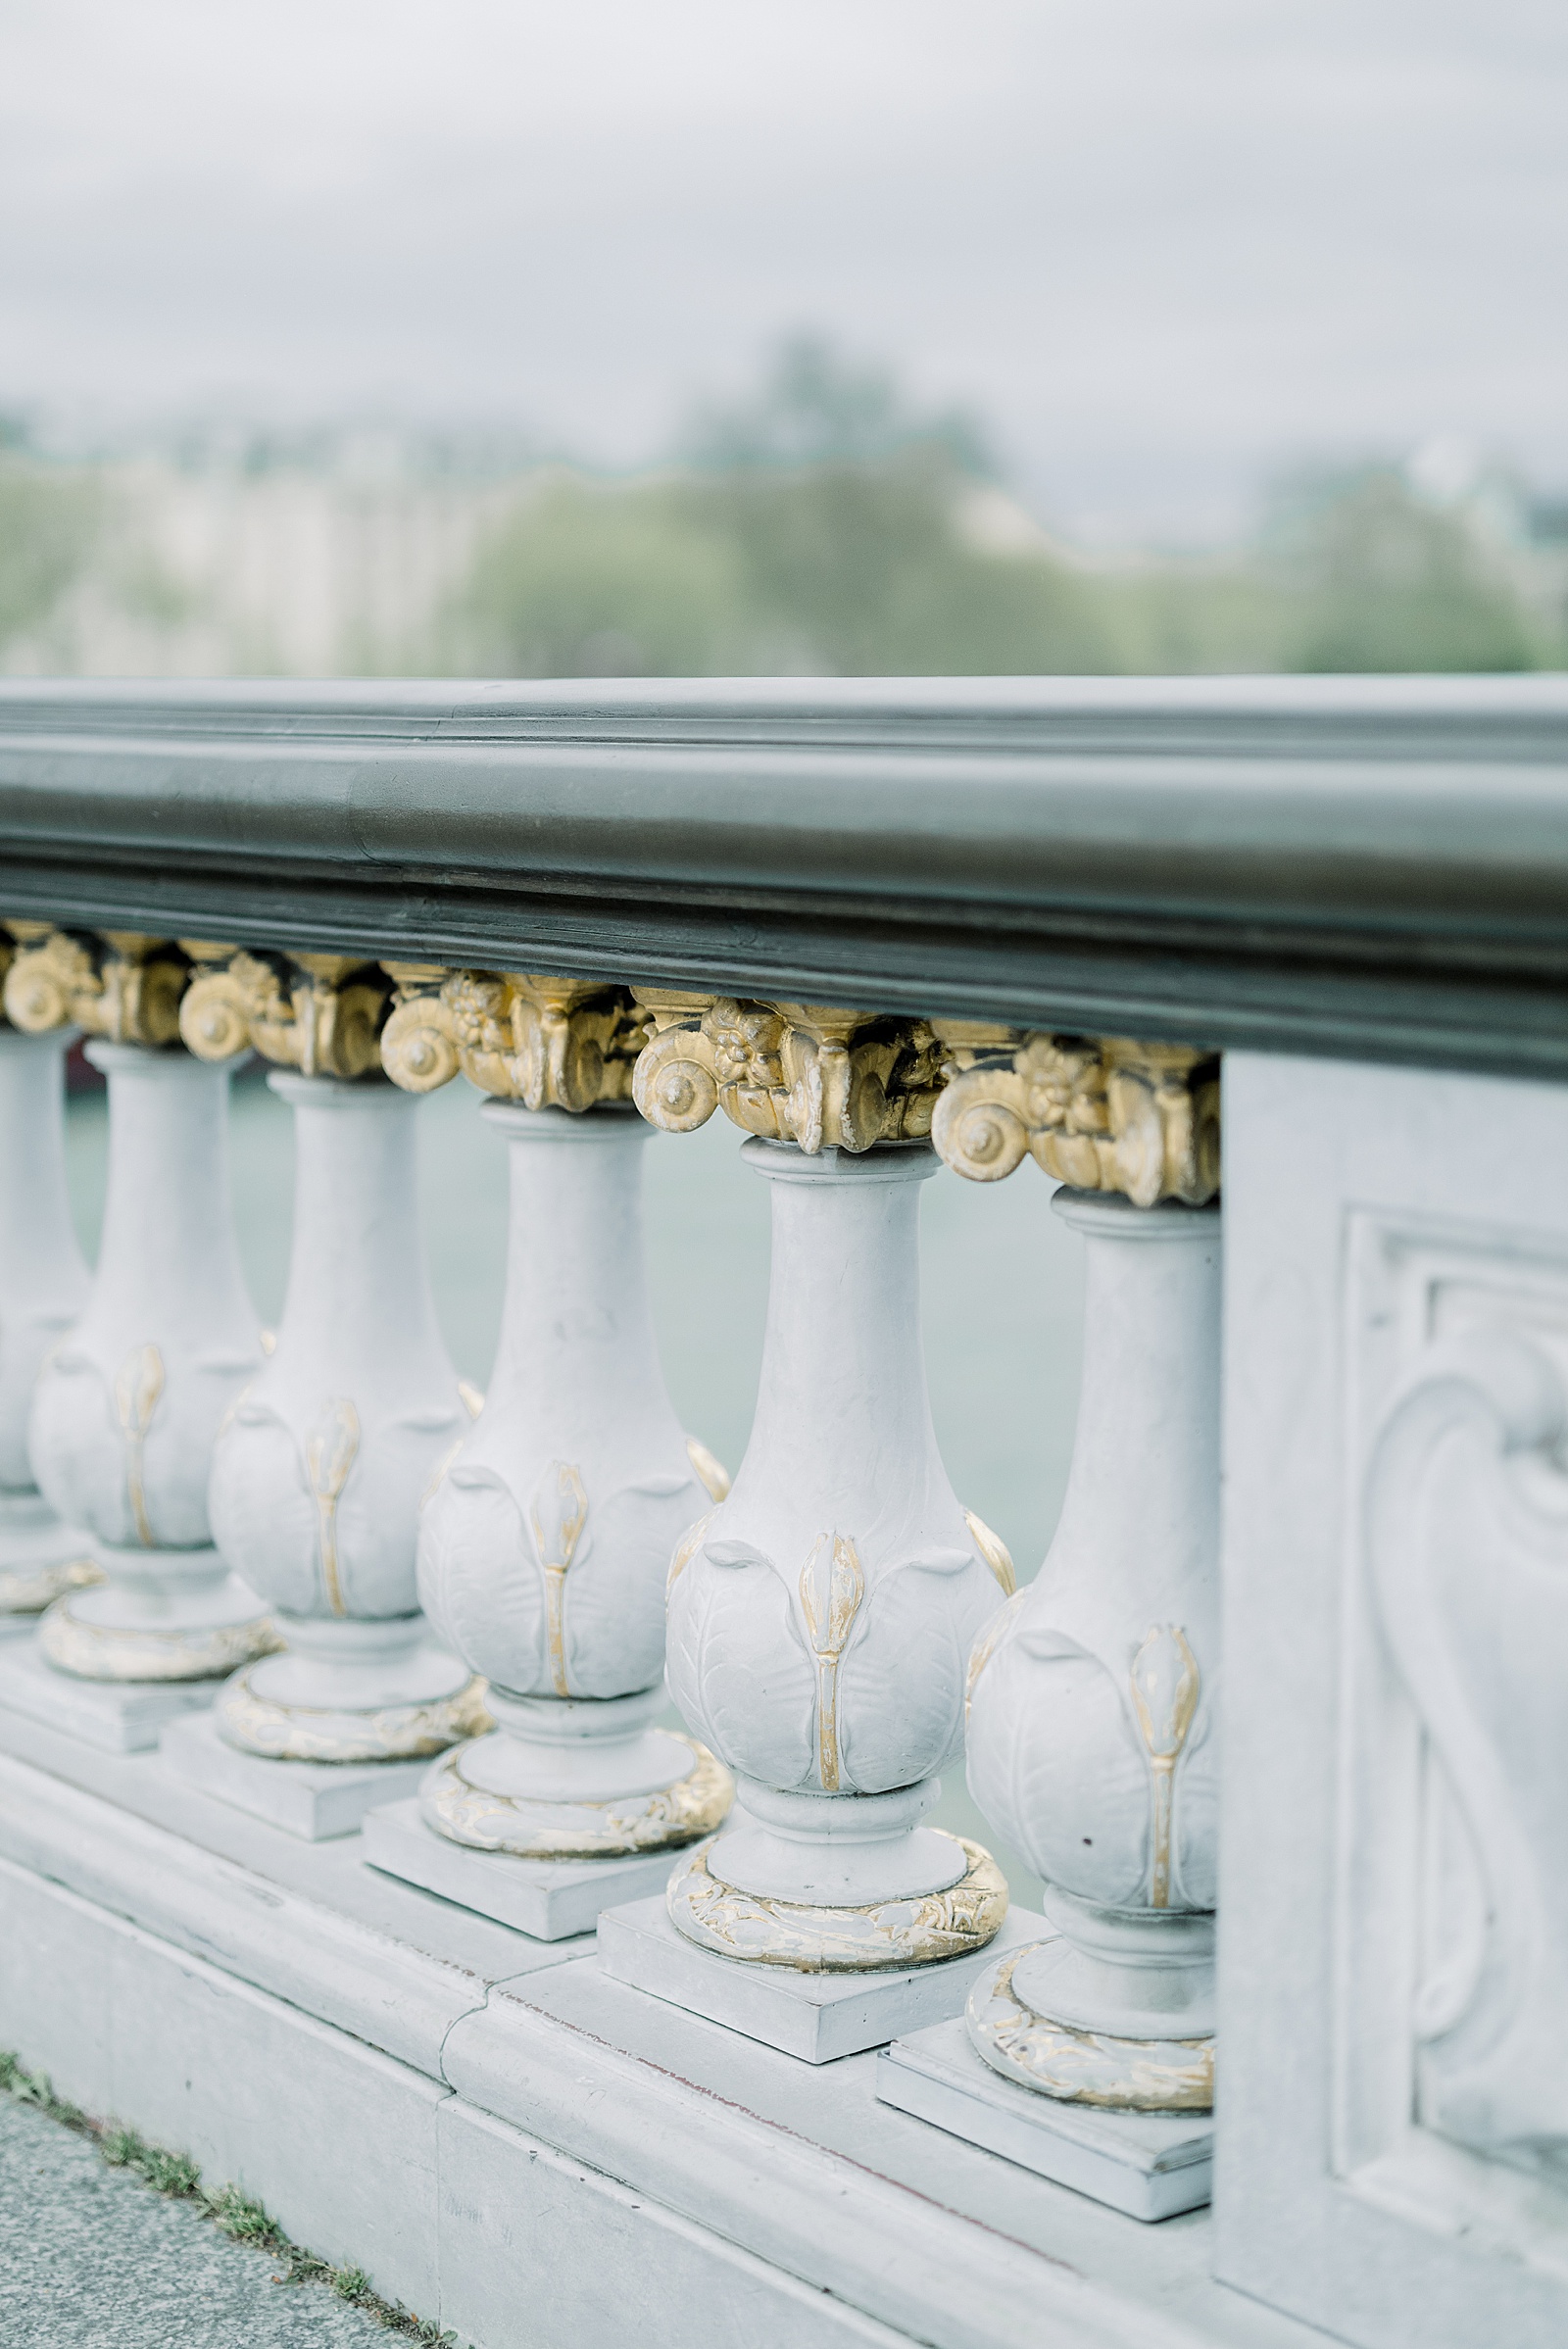 A close up of the details on the pont alexandre iii featuring gilded details